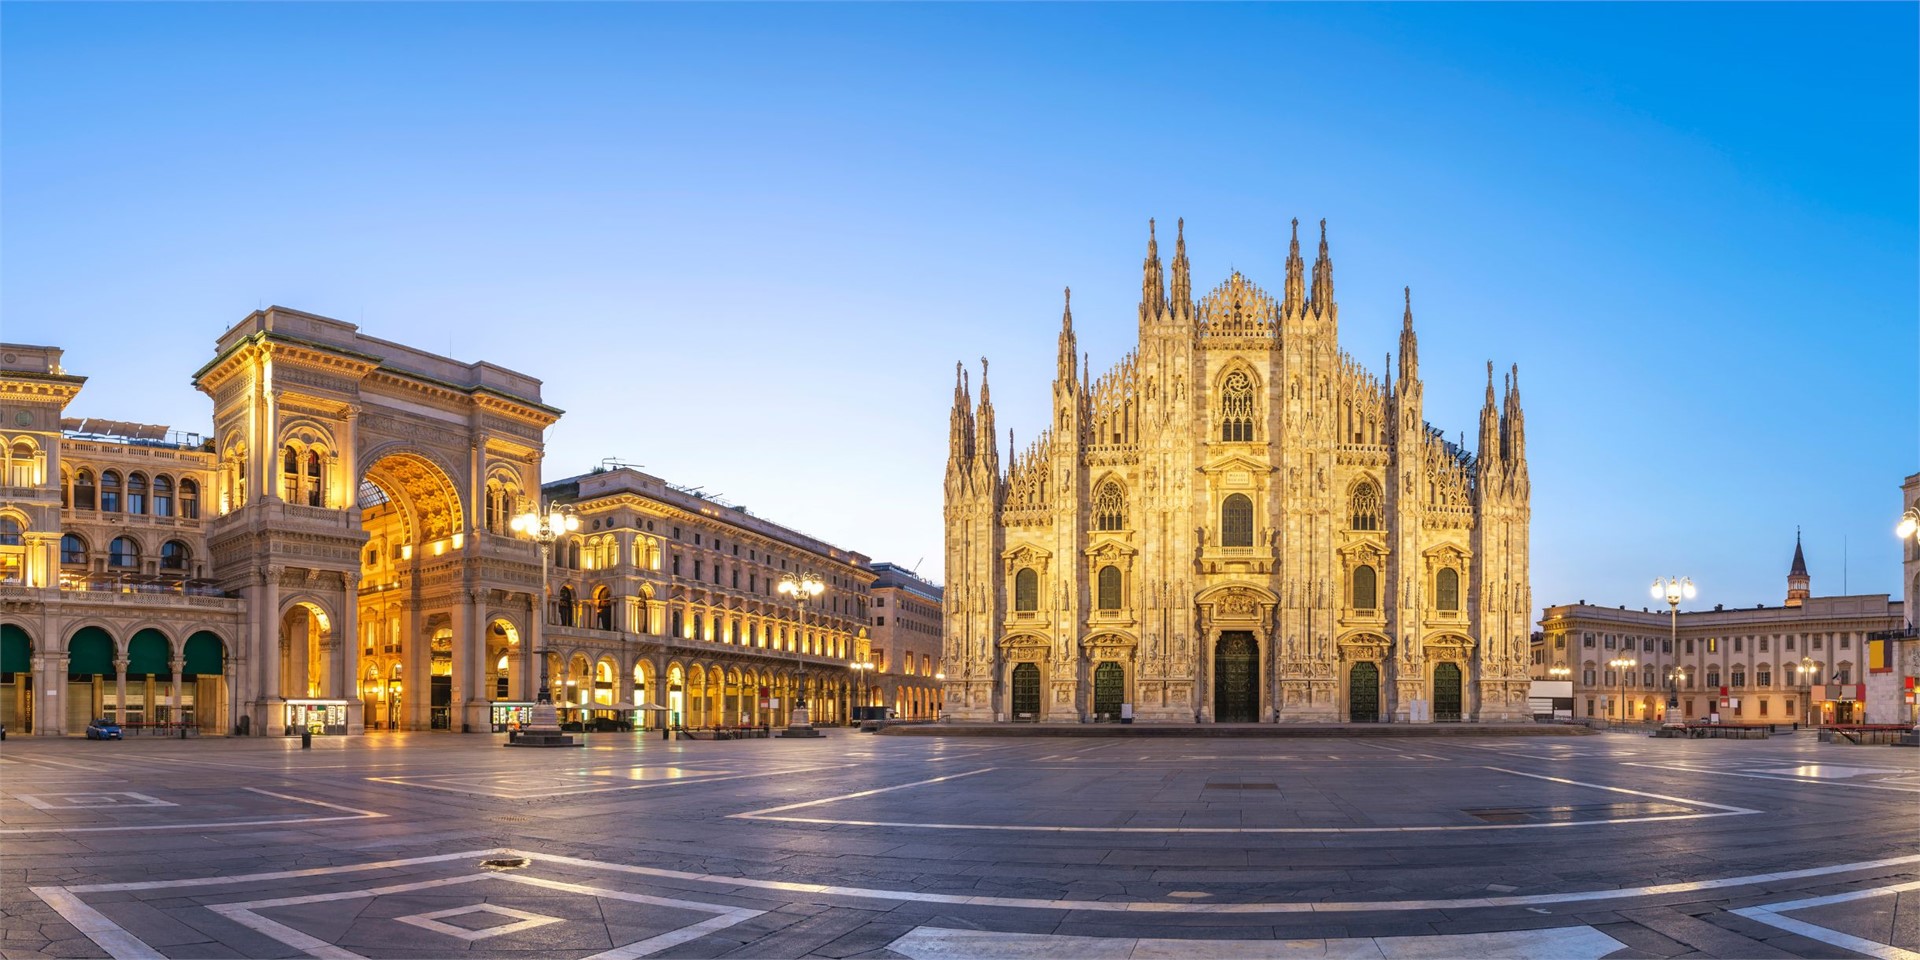 Hotels and accommodation in Milan, Italy
